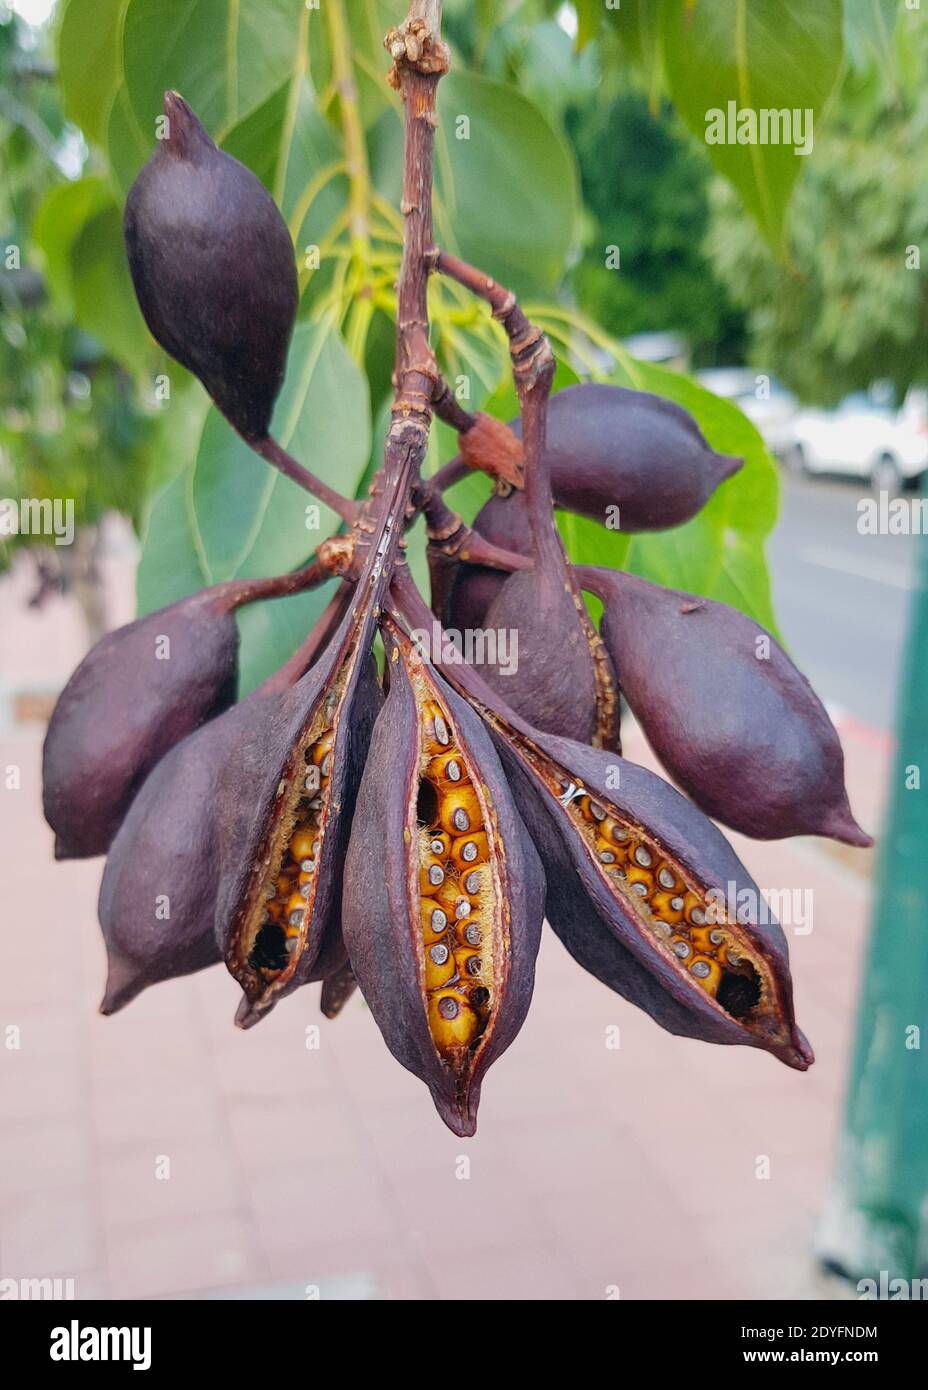 Fruits of the tree Brachychiton populneus or kurrajong. An unusual plant is native from Australia. Soft focus background, lifestyle. Stock Photo